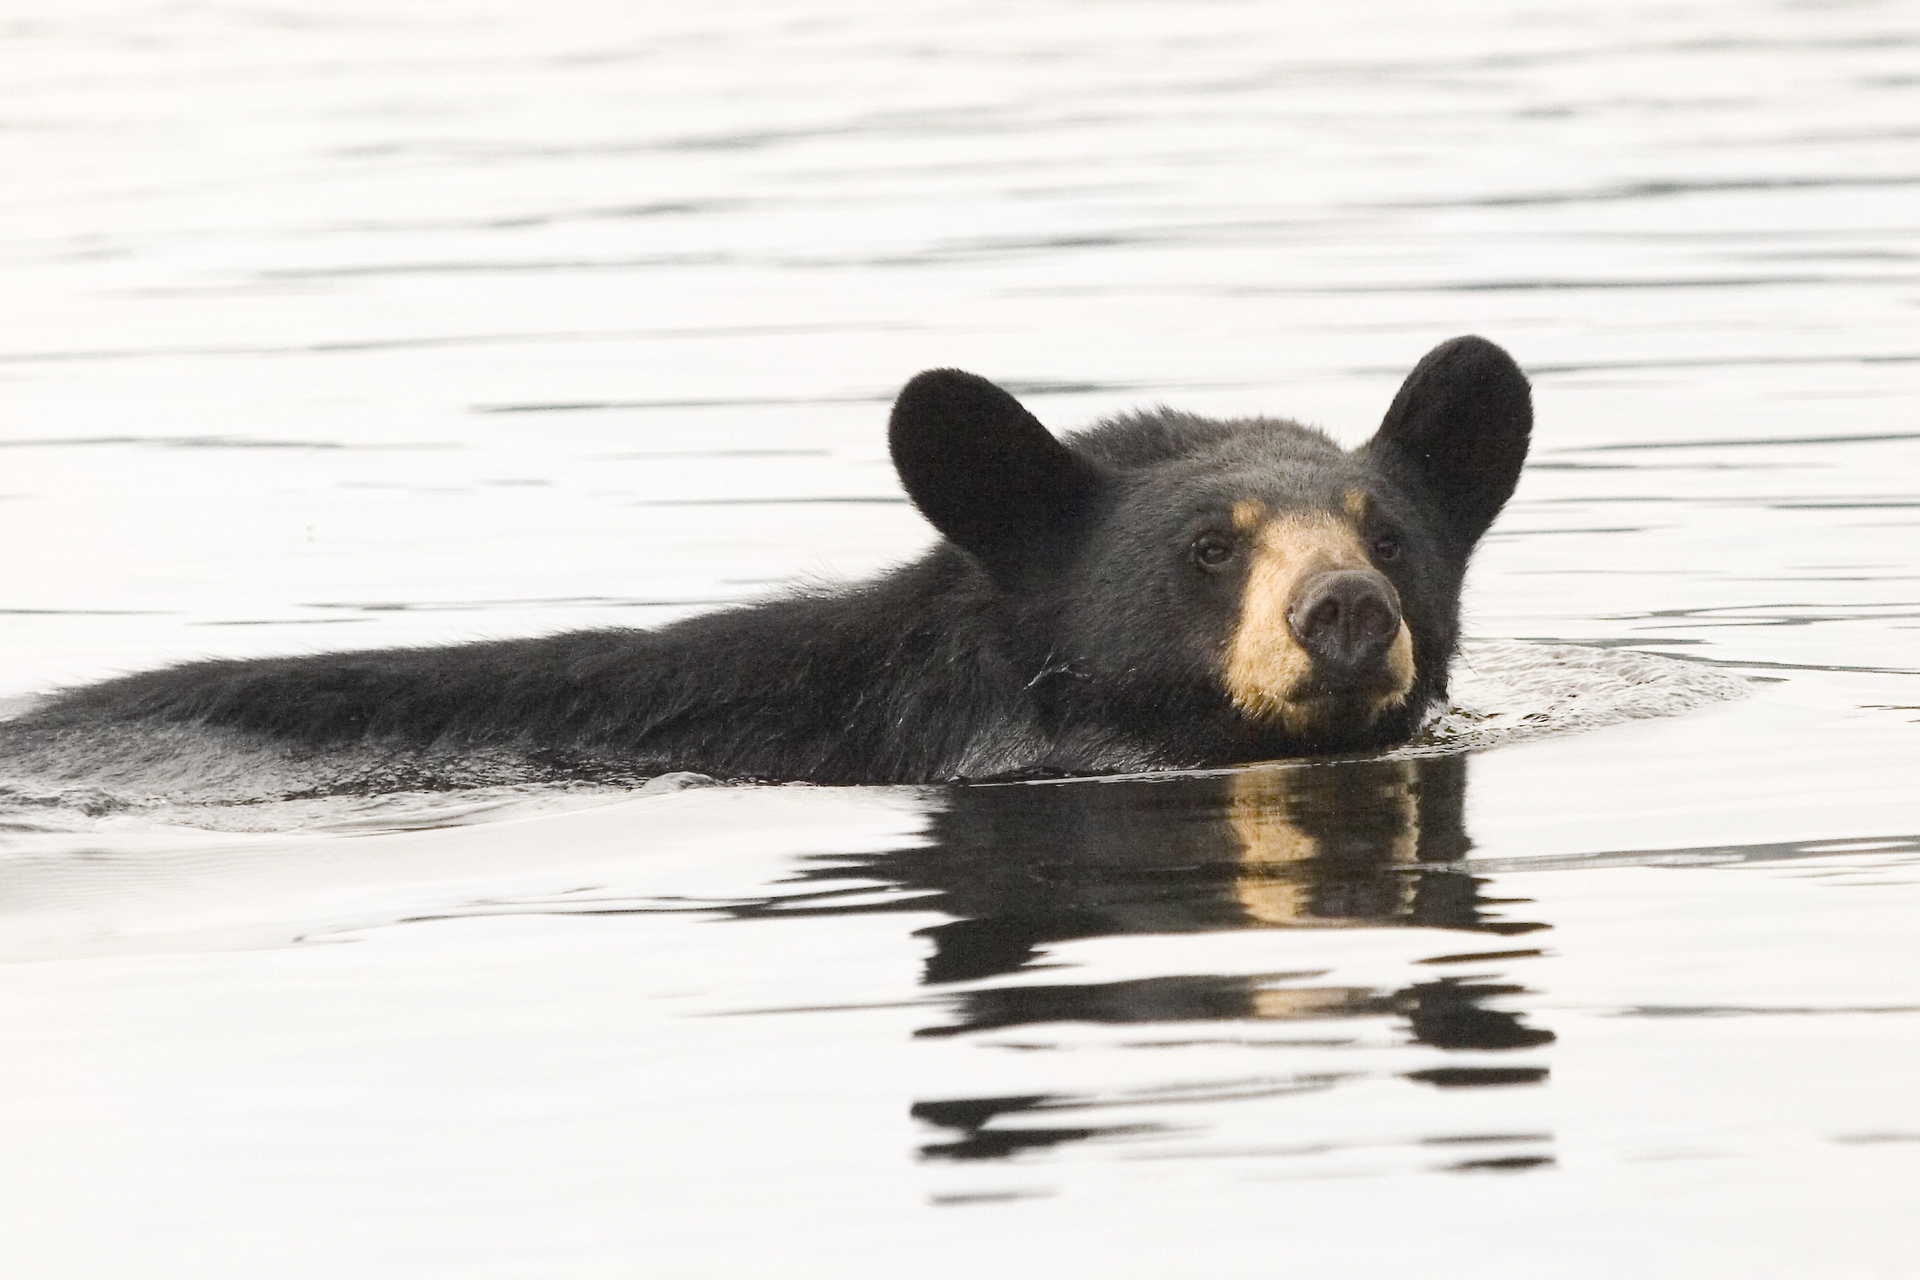 A large black bear with a brown snout swimming.